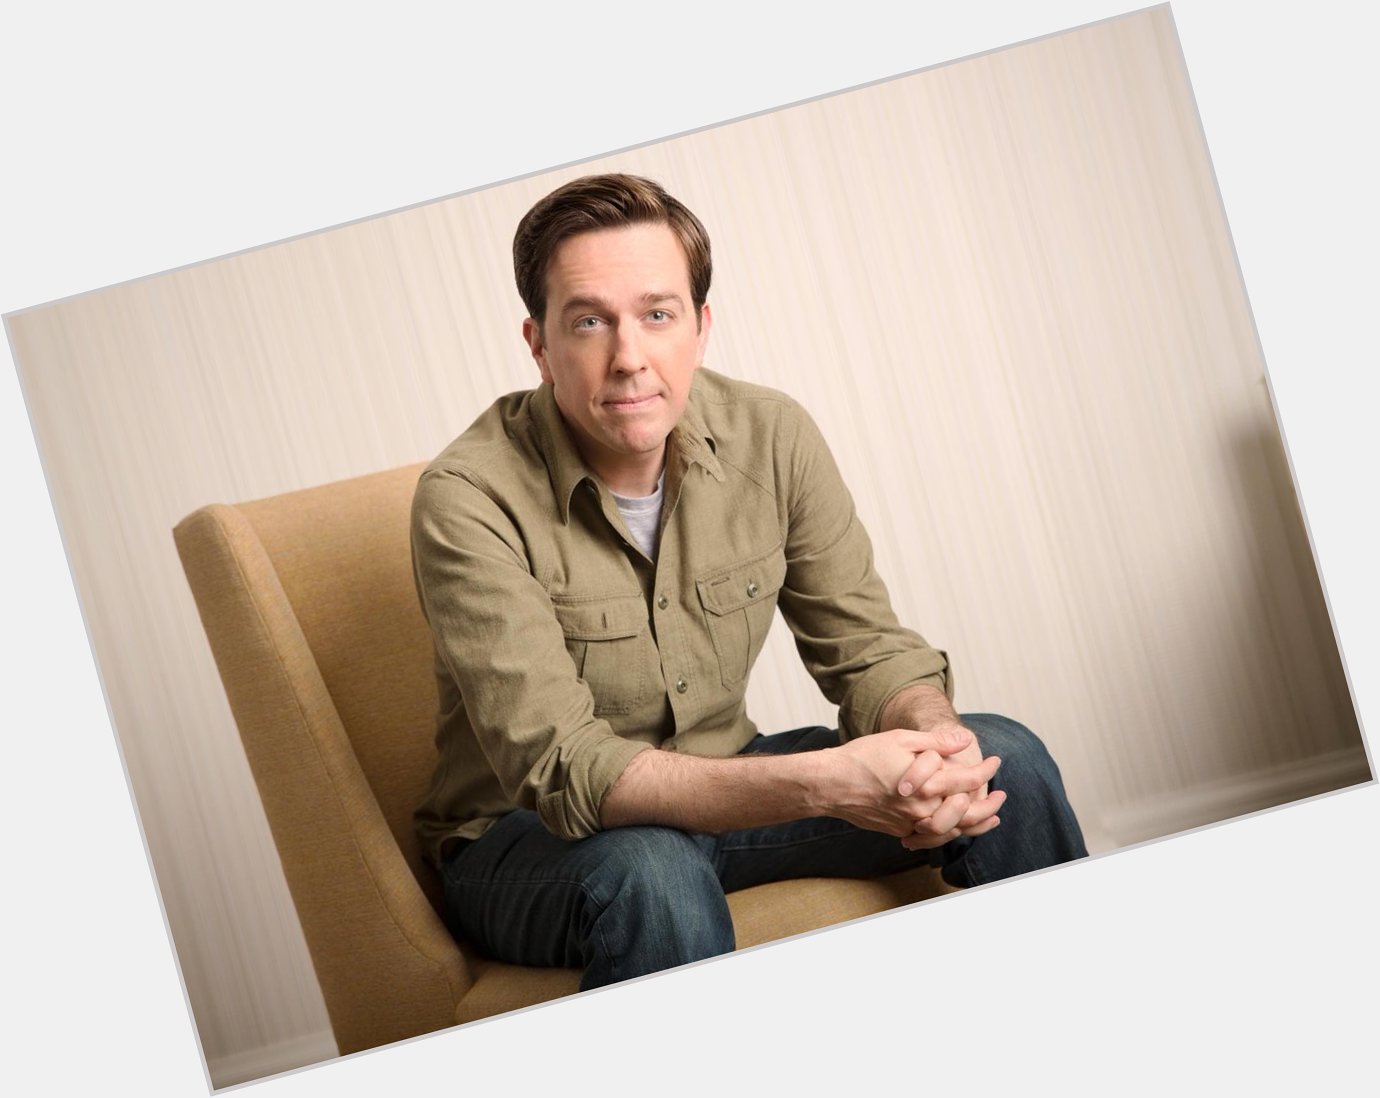 Happy Birthday to the very talented Ed Helms! 